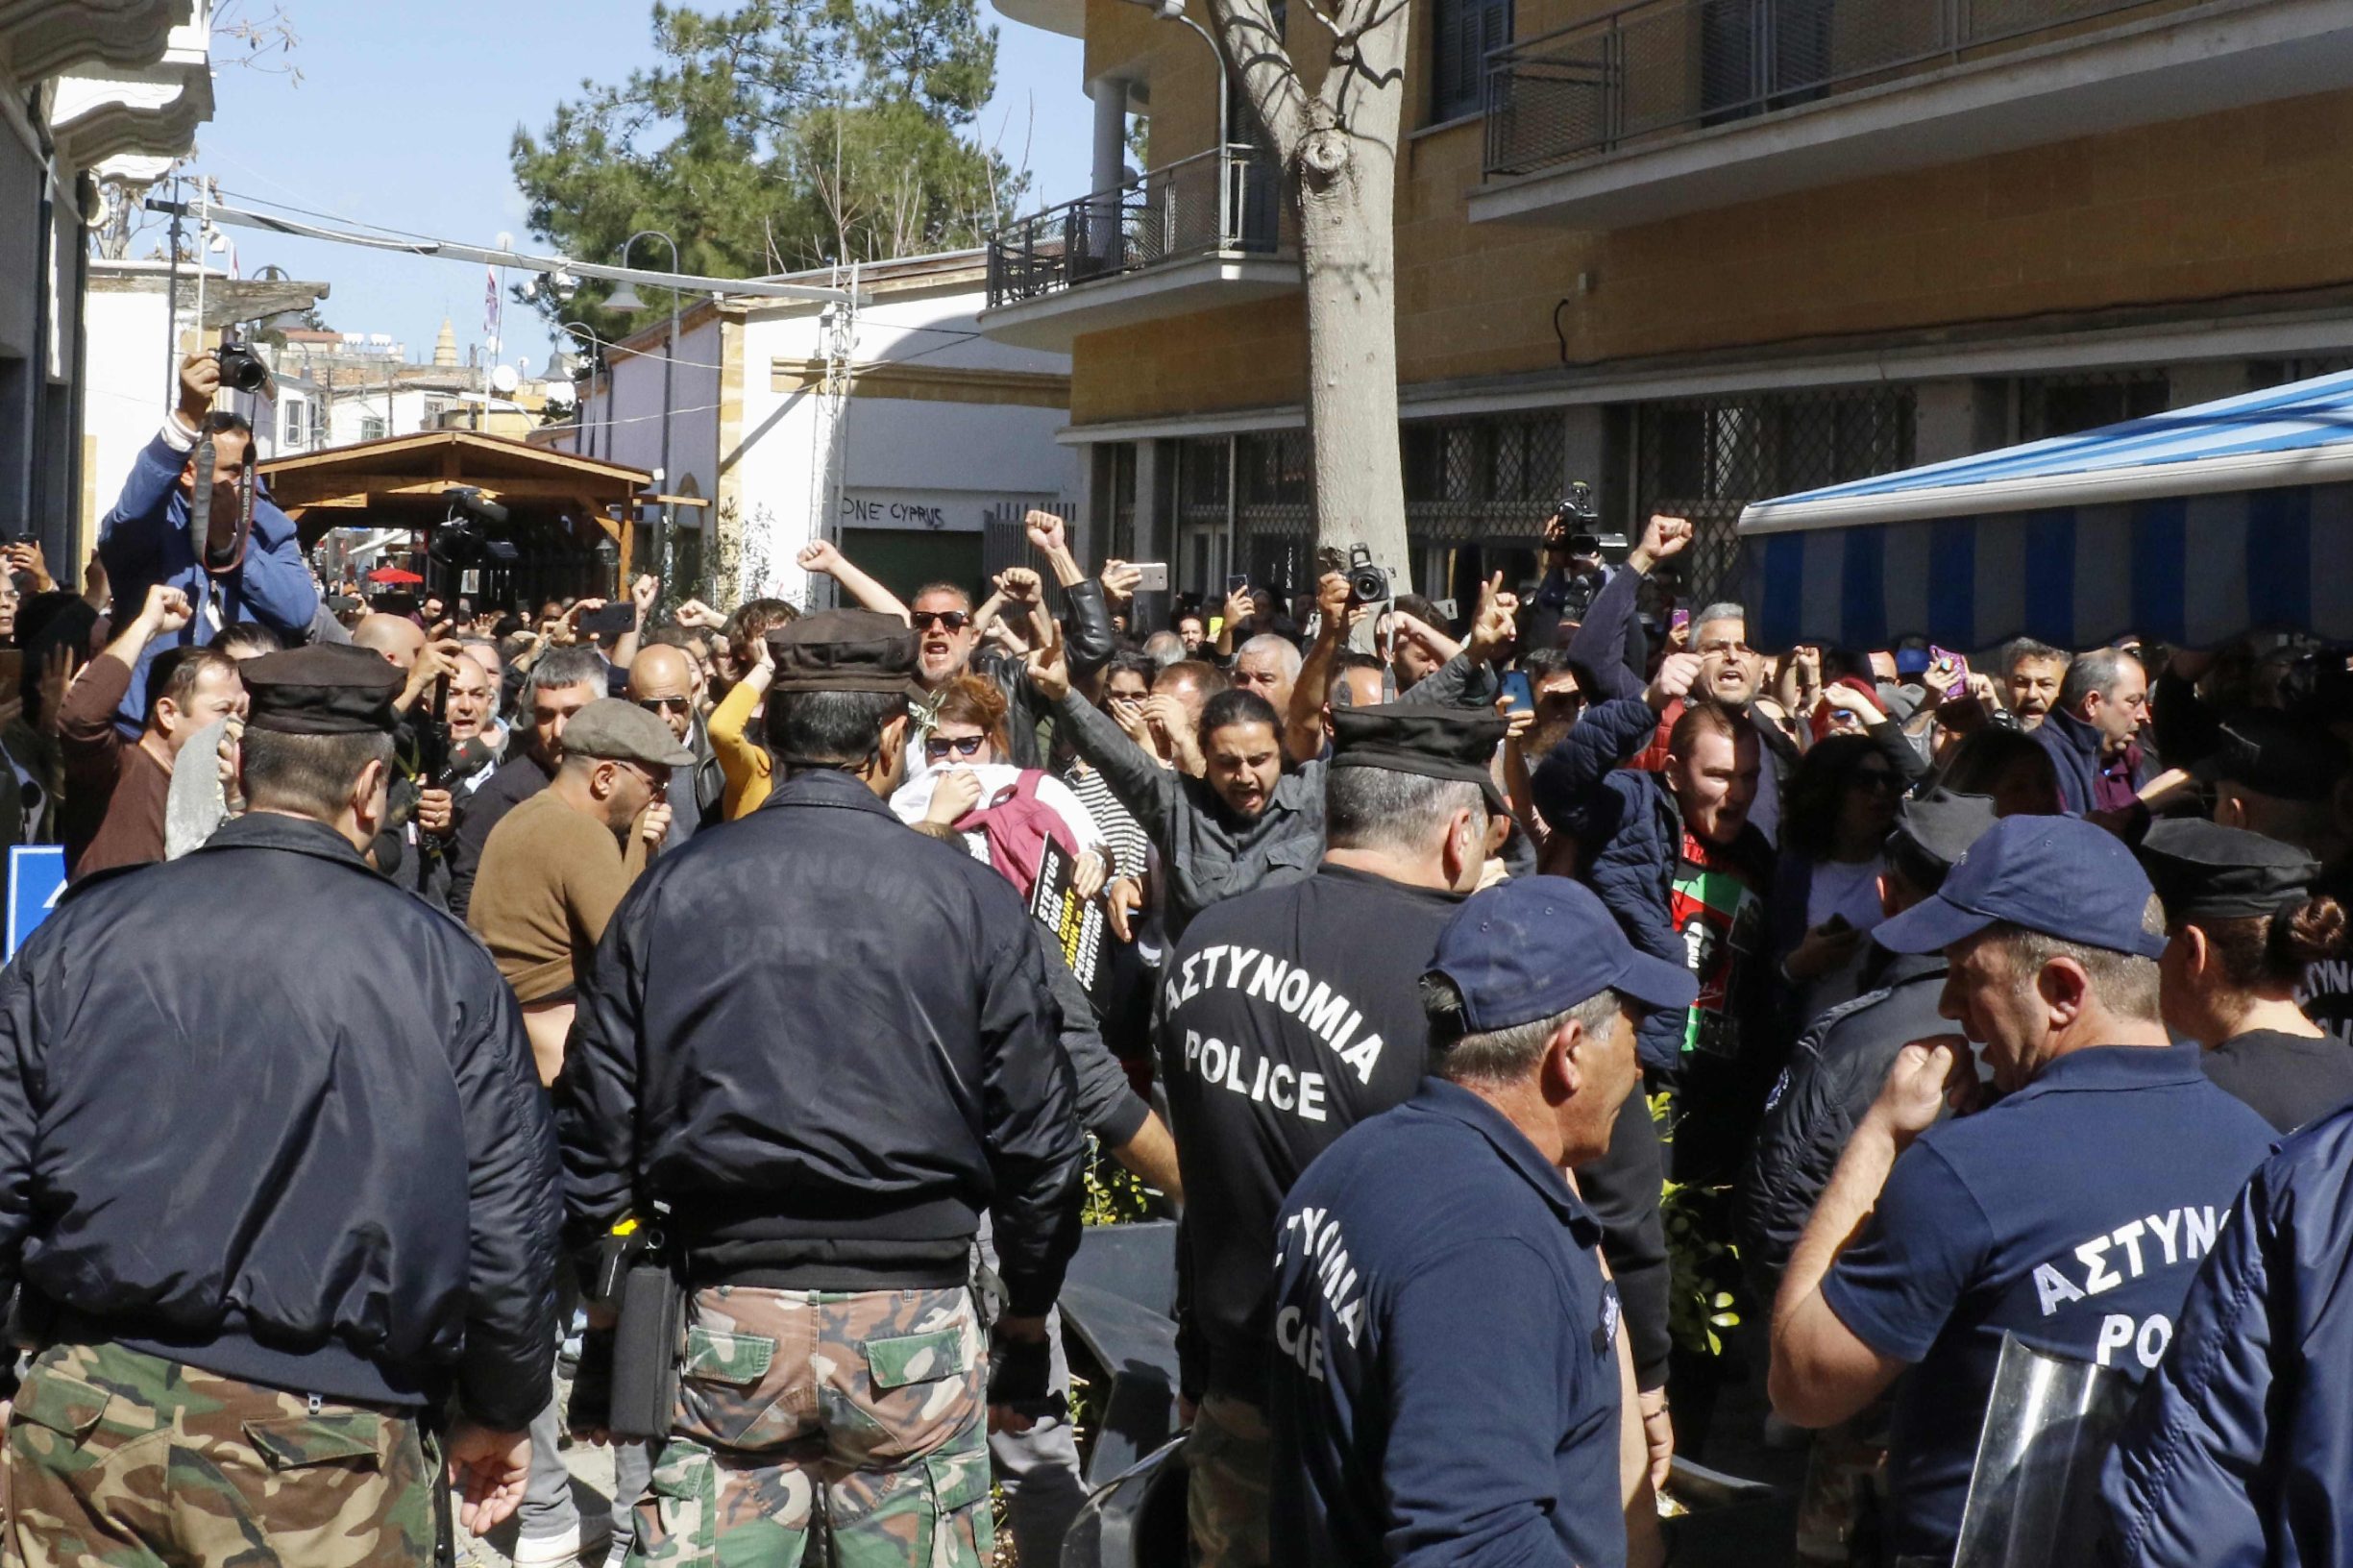 Protesters clash with Cypriot police during a demonstration on either side of the Ledra Street crossing in central Nicosia on March 7, 2020, against the closure of crossings on the divided island's ceasefire line over coronavirus fears. - Cyprus police used teargas to disperse hundreds of protesters demonstrating against the closure of crossings on the divided island's ceasefire line over coronavirus fears. A police spokesperson said four officers were injured in the capital Nicosia during scuffles with demonstrators in which police made 